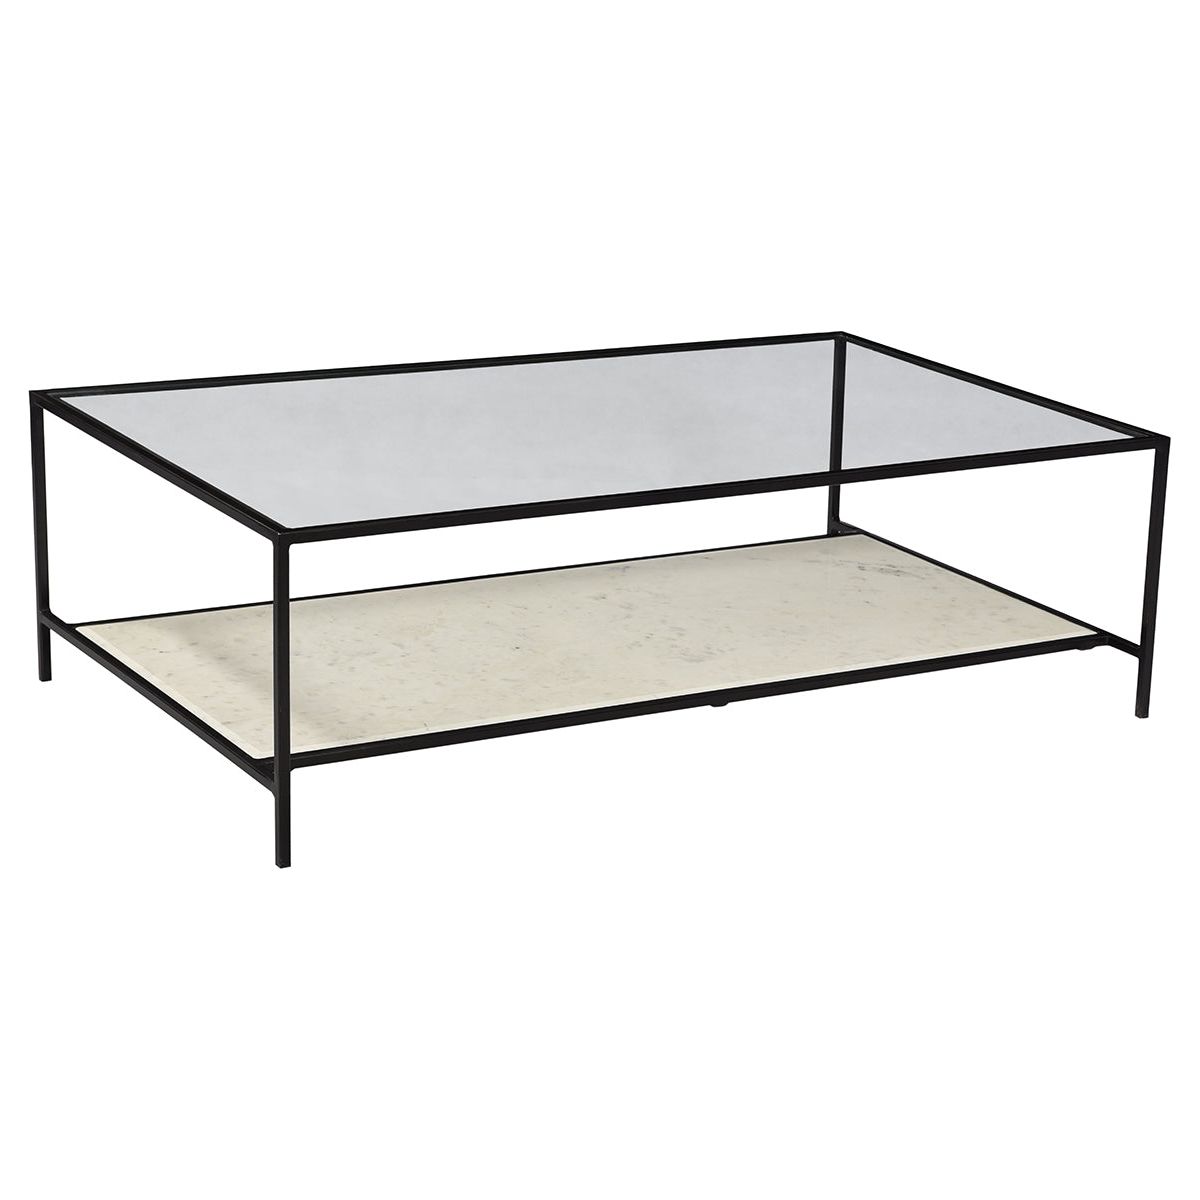 The Ramos Coffee Table is a chic addition to any room with a glass top, gun metal black finish, and marble bottom shelf.  Size: 52"w x 28"d x 15"h